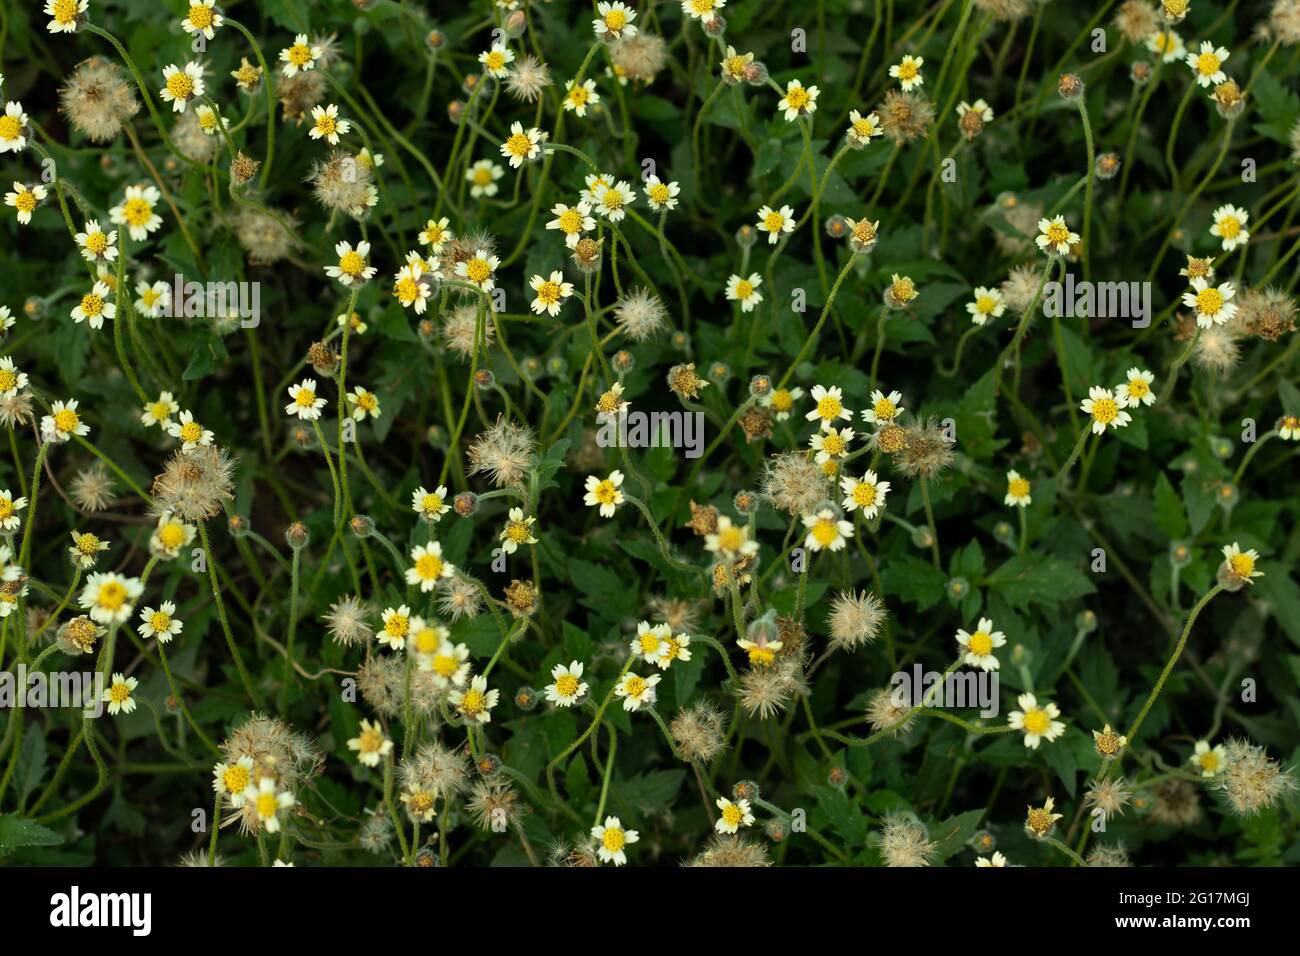 Coatbuttons flower or Tridax procumbens wild grass plant that also commonly known as coatbuttons, is a species of flowering plant in the daisy family Stock Photo